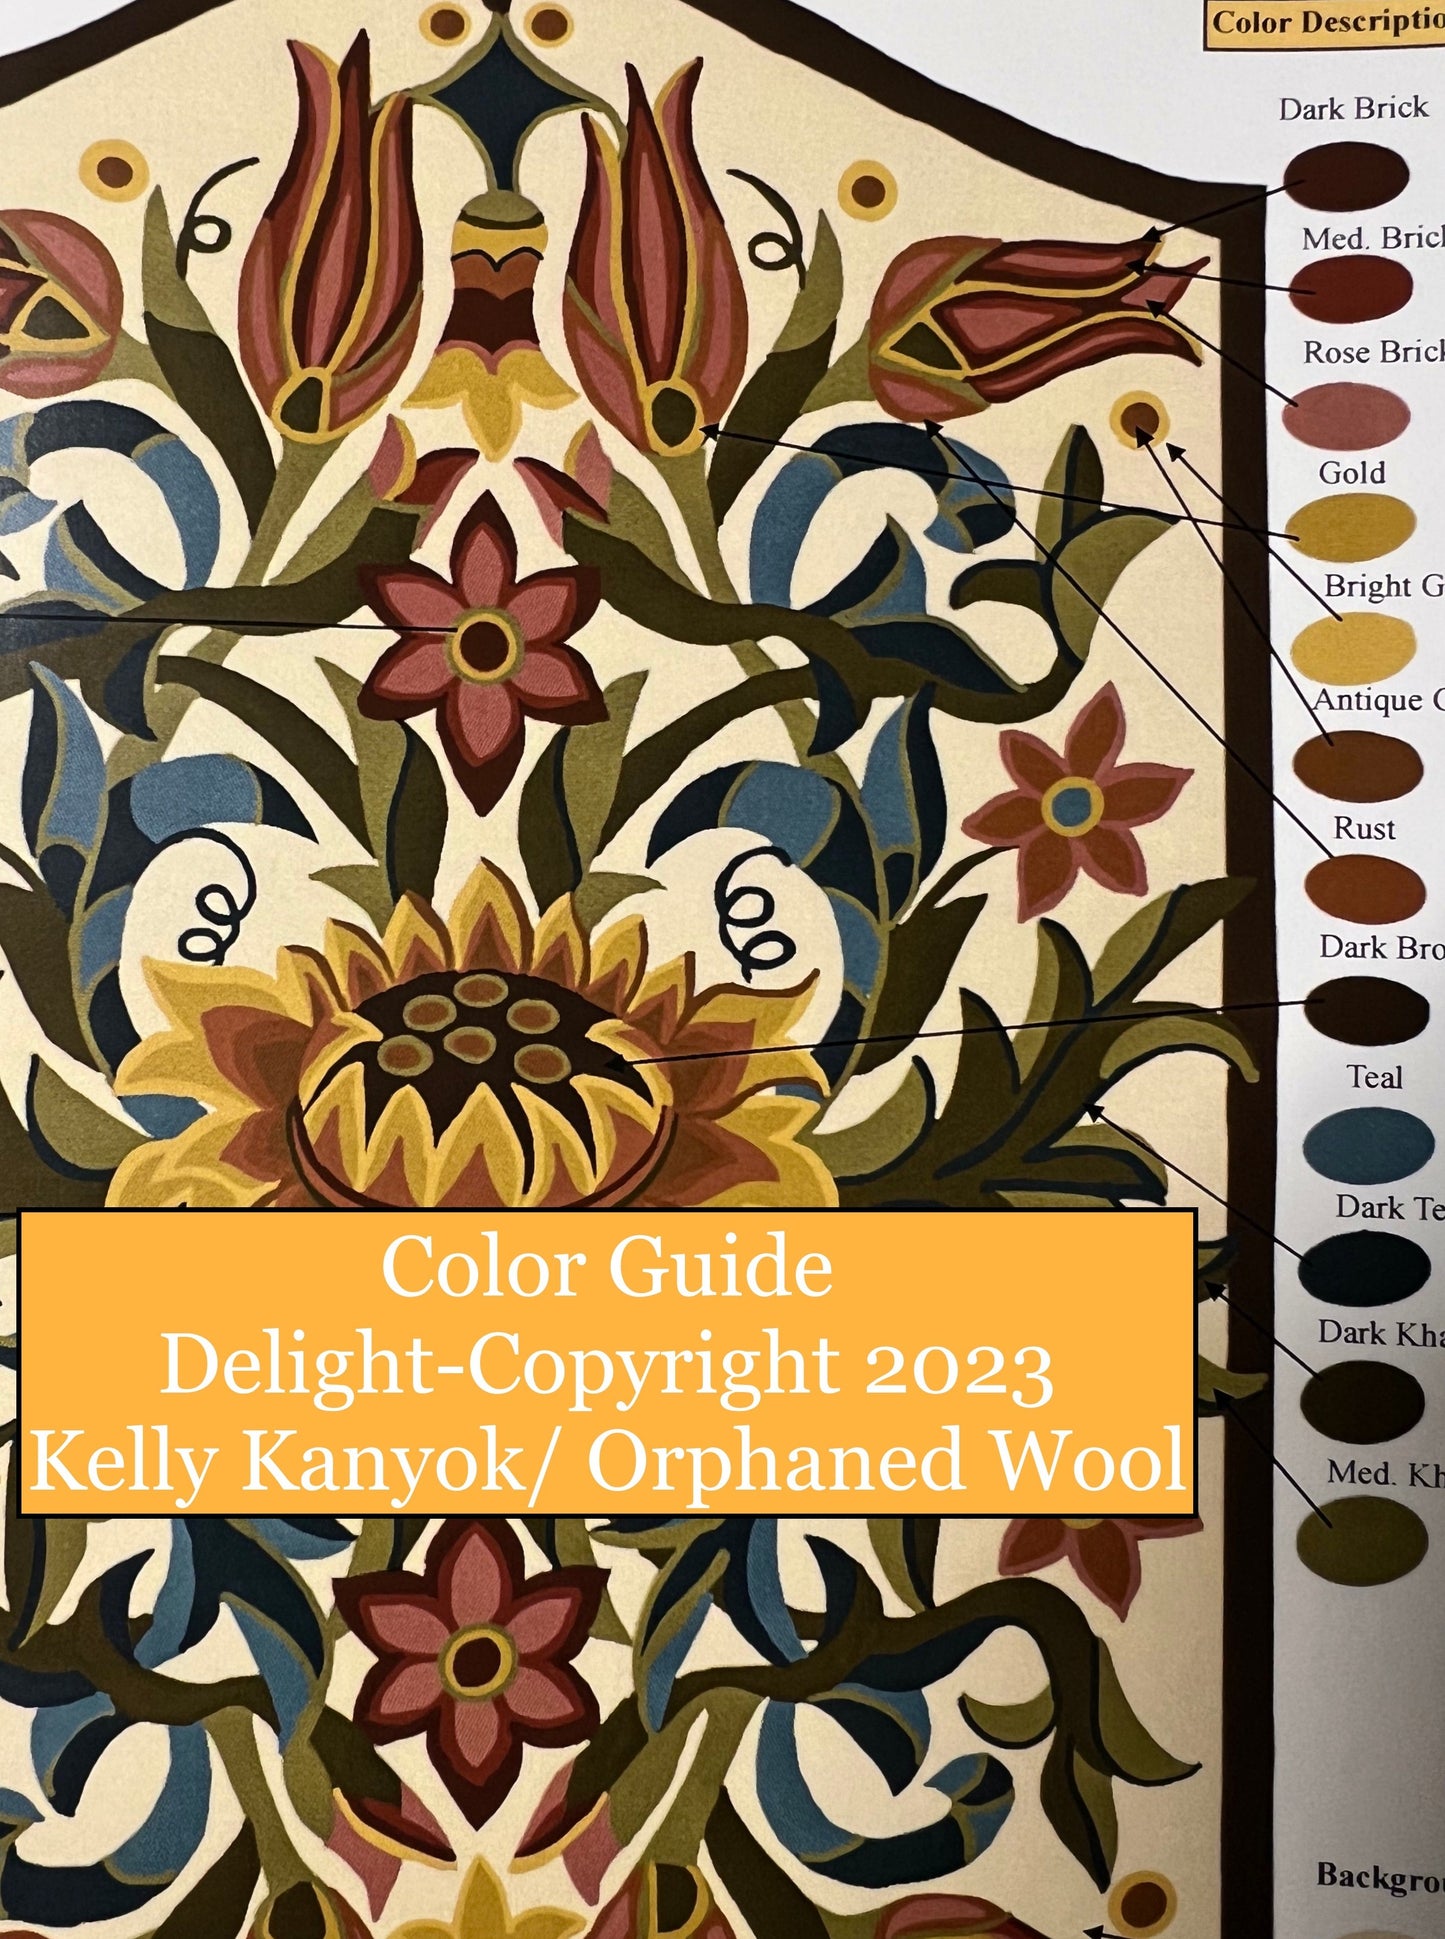 Delight Linen rug hooking or rug punch needle pattern by Orphaned Wool is hand-drawn on quality linen. Includes a beautiful color guide which makes creating this lovely floral design very enjoyable. This pattern is offered in two sizes. Copyright 2023 Kelly Kanyok